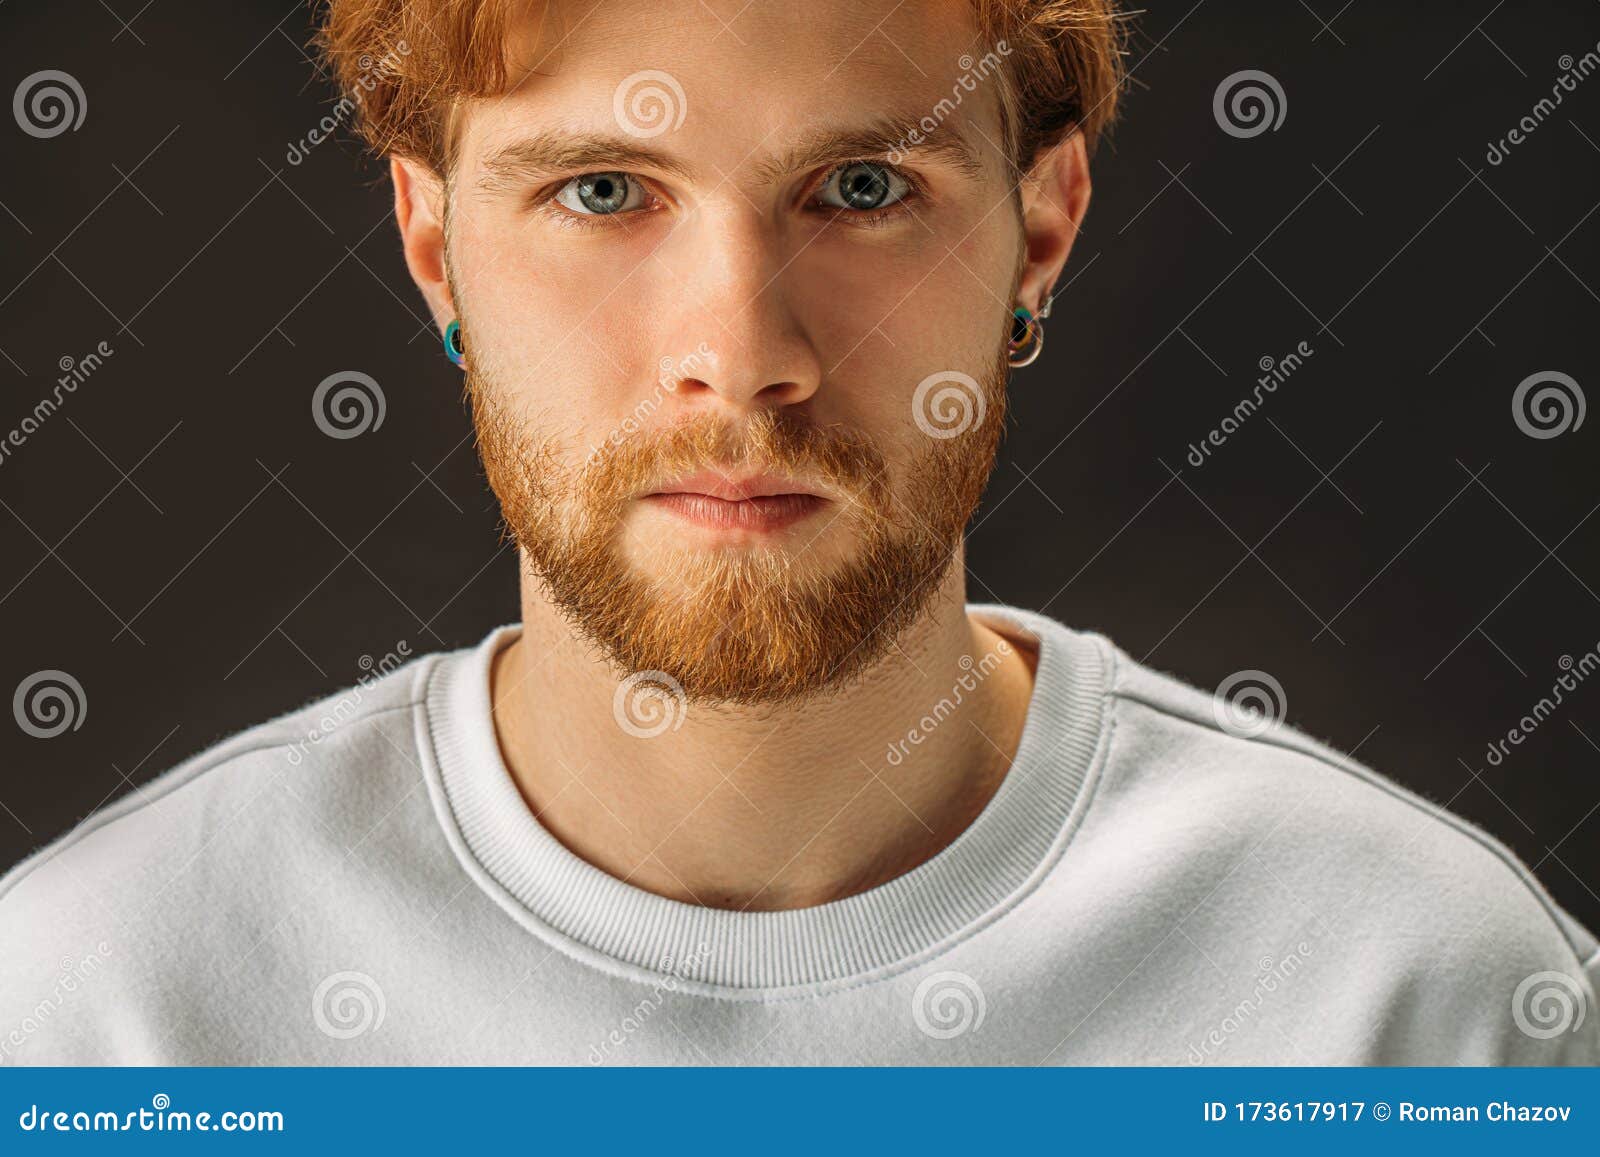 Seriously Looking Caucasian Man with Red Hair and Beard Stock Image - Image  of horizontal, expression: 173617917